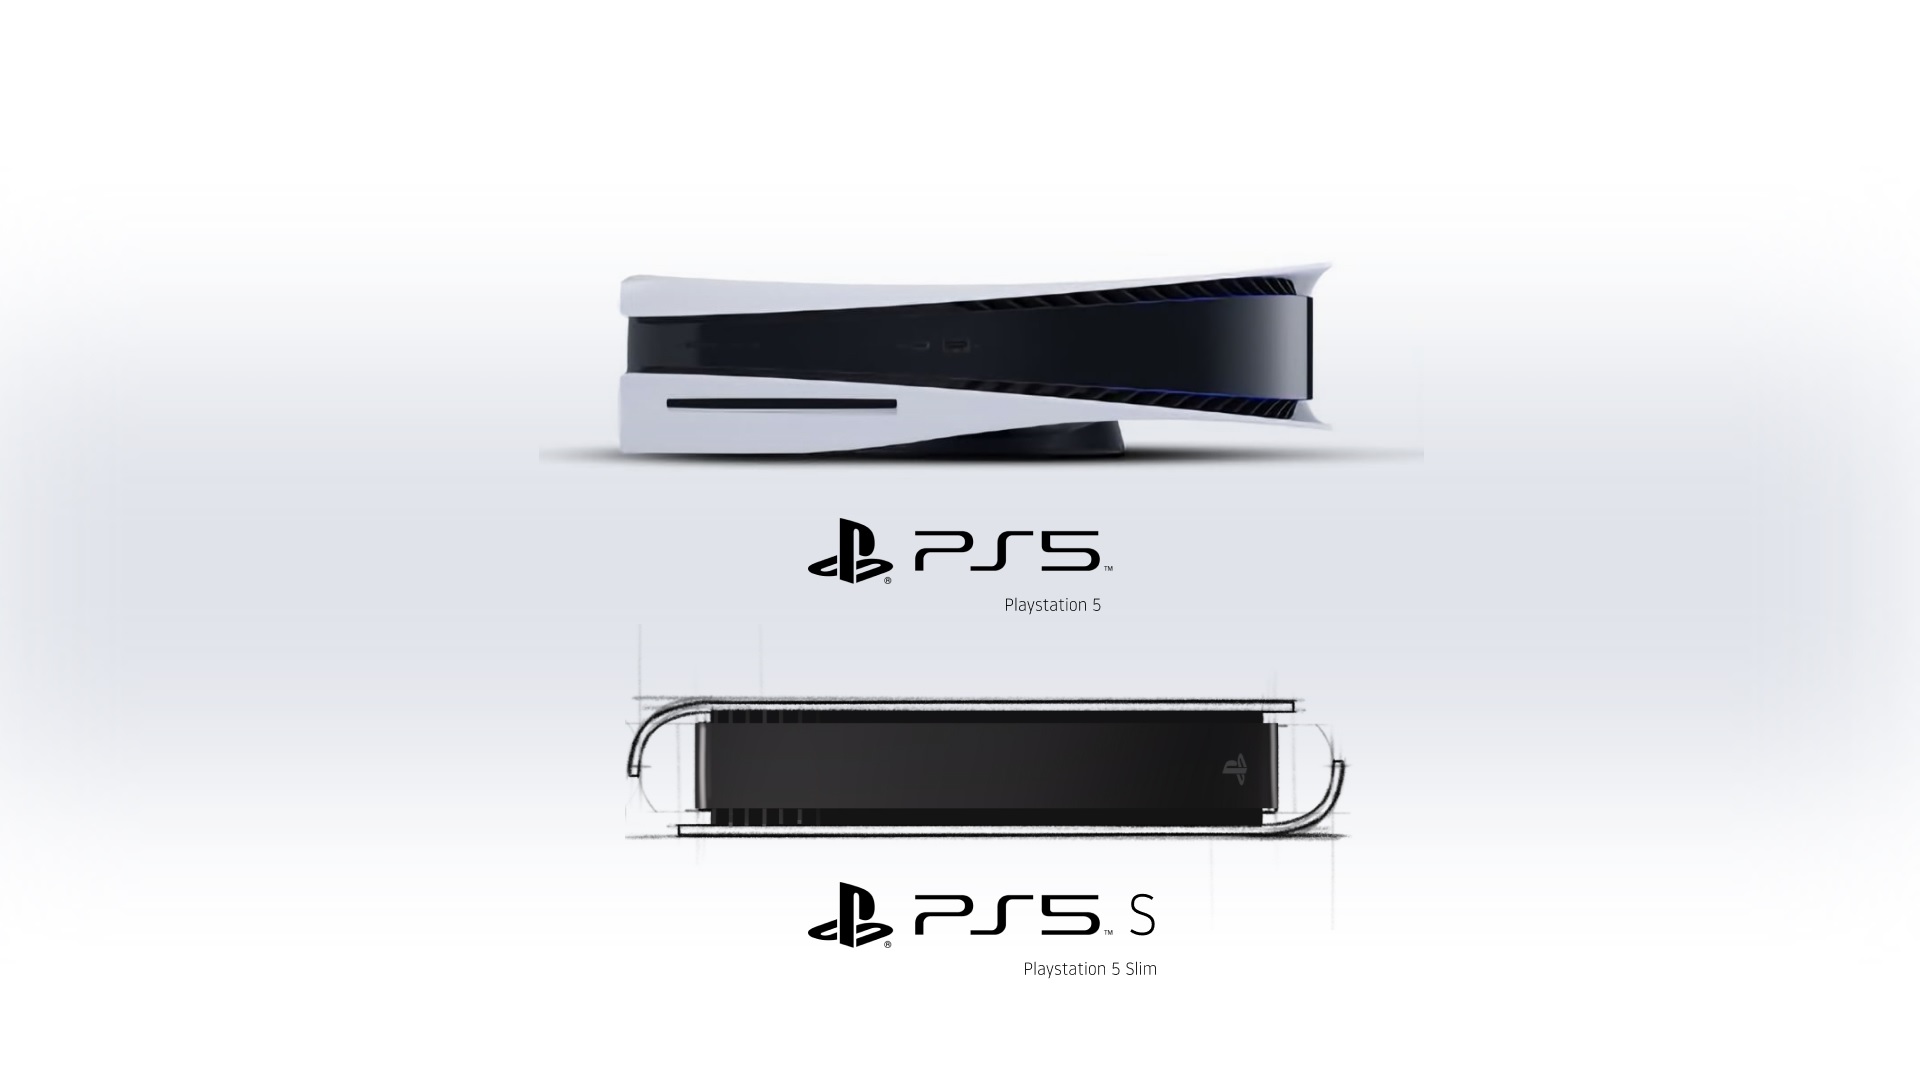 PS5 Slim rumored release date, price, design and more